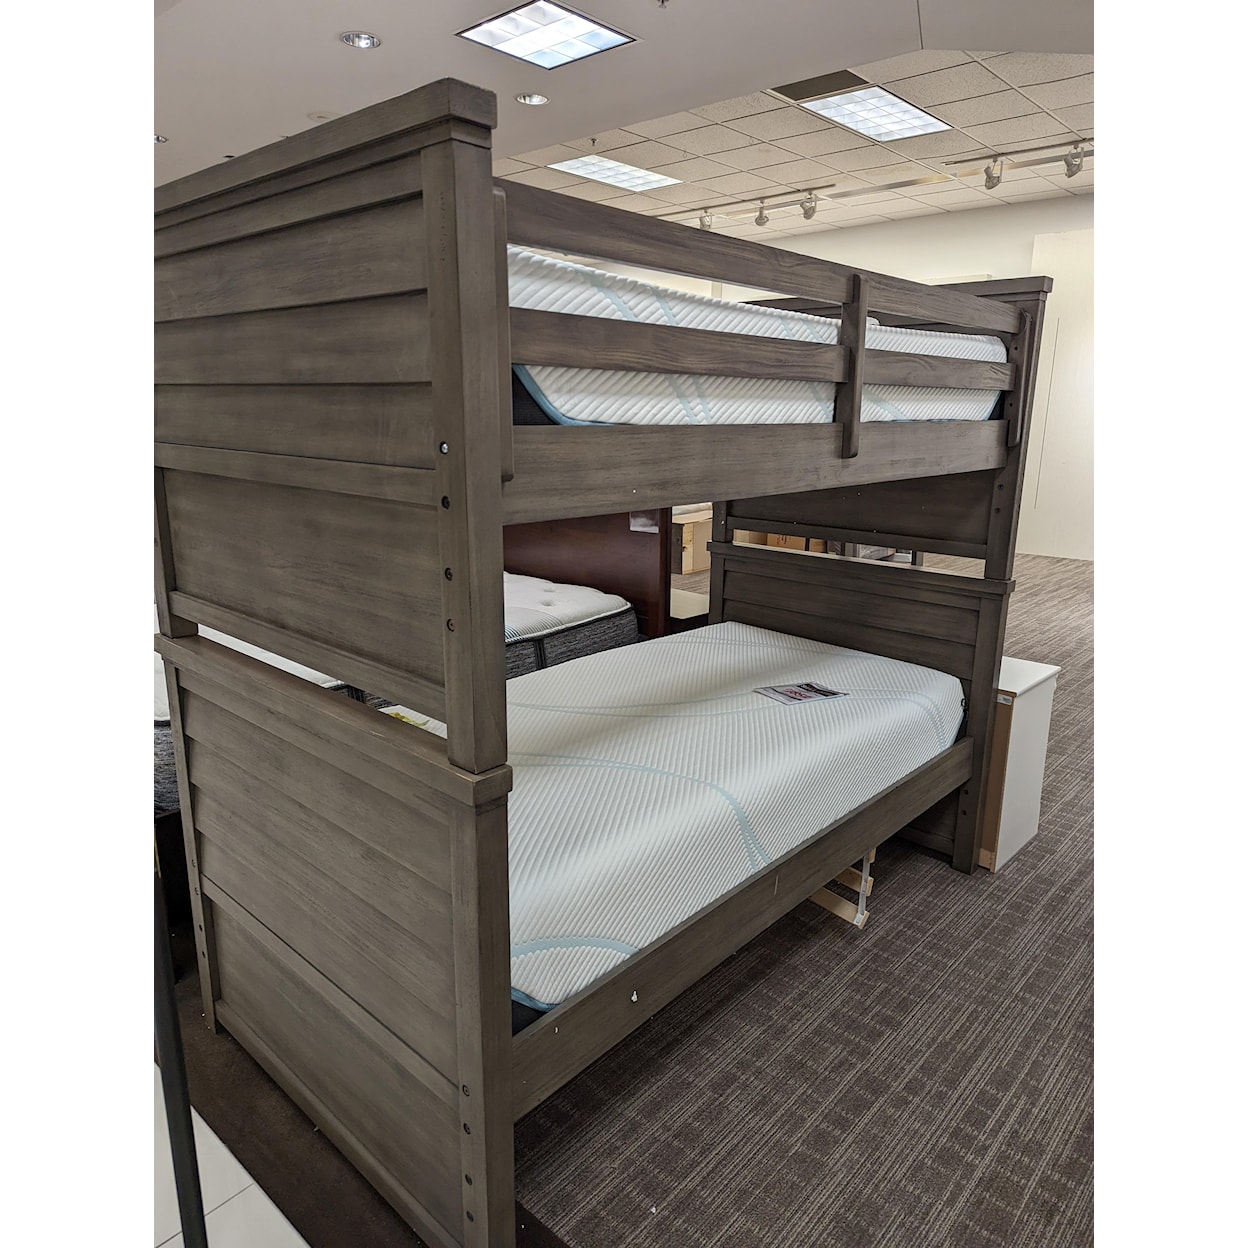 Morris Outlet Clearance and Closeouts Fairfield Commons Mall Last One! Bungalow Bunk Beds!